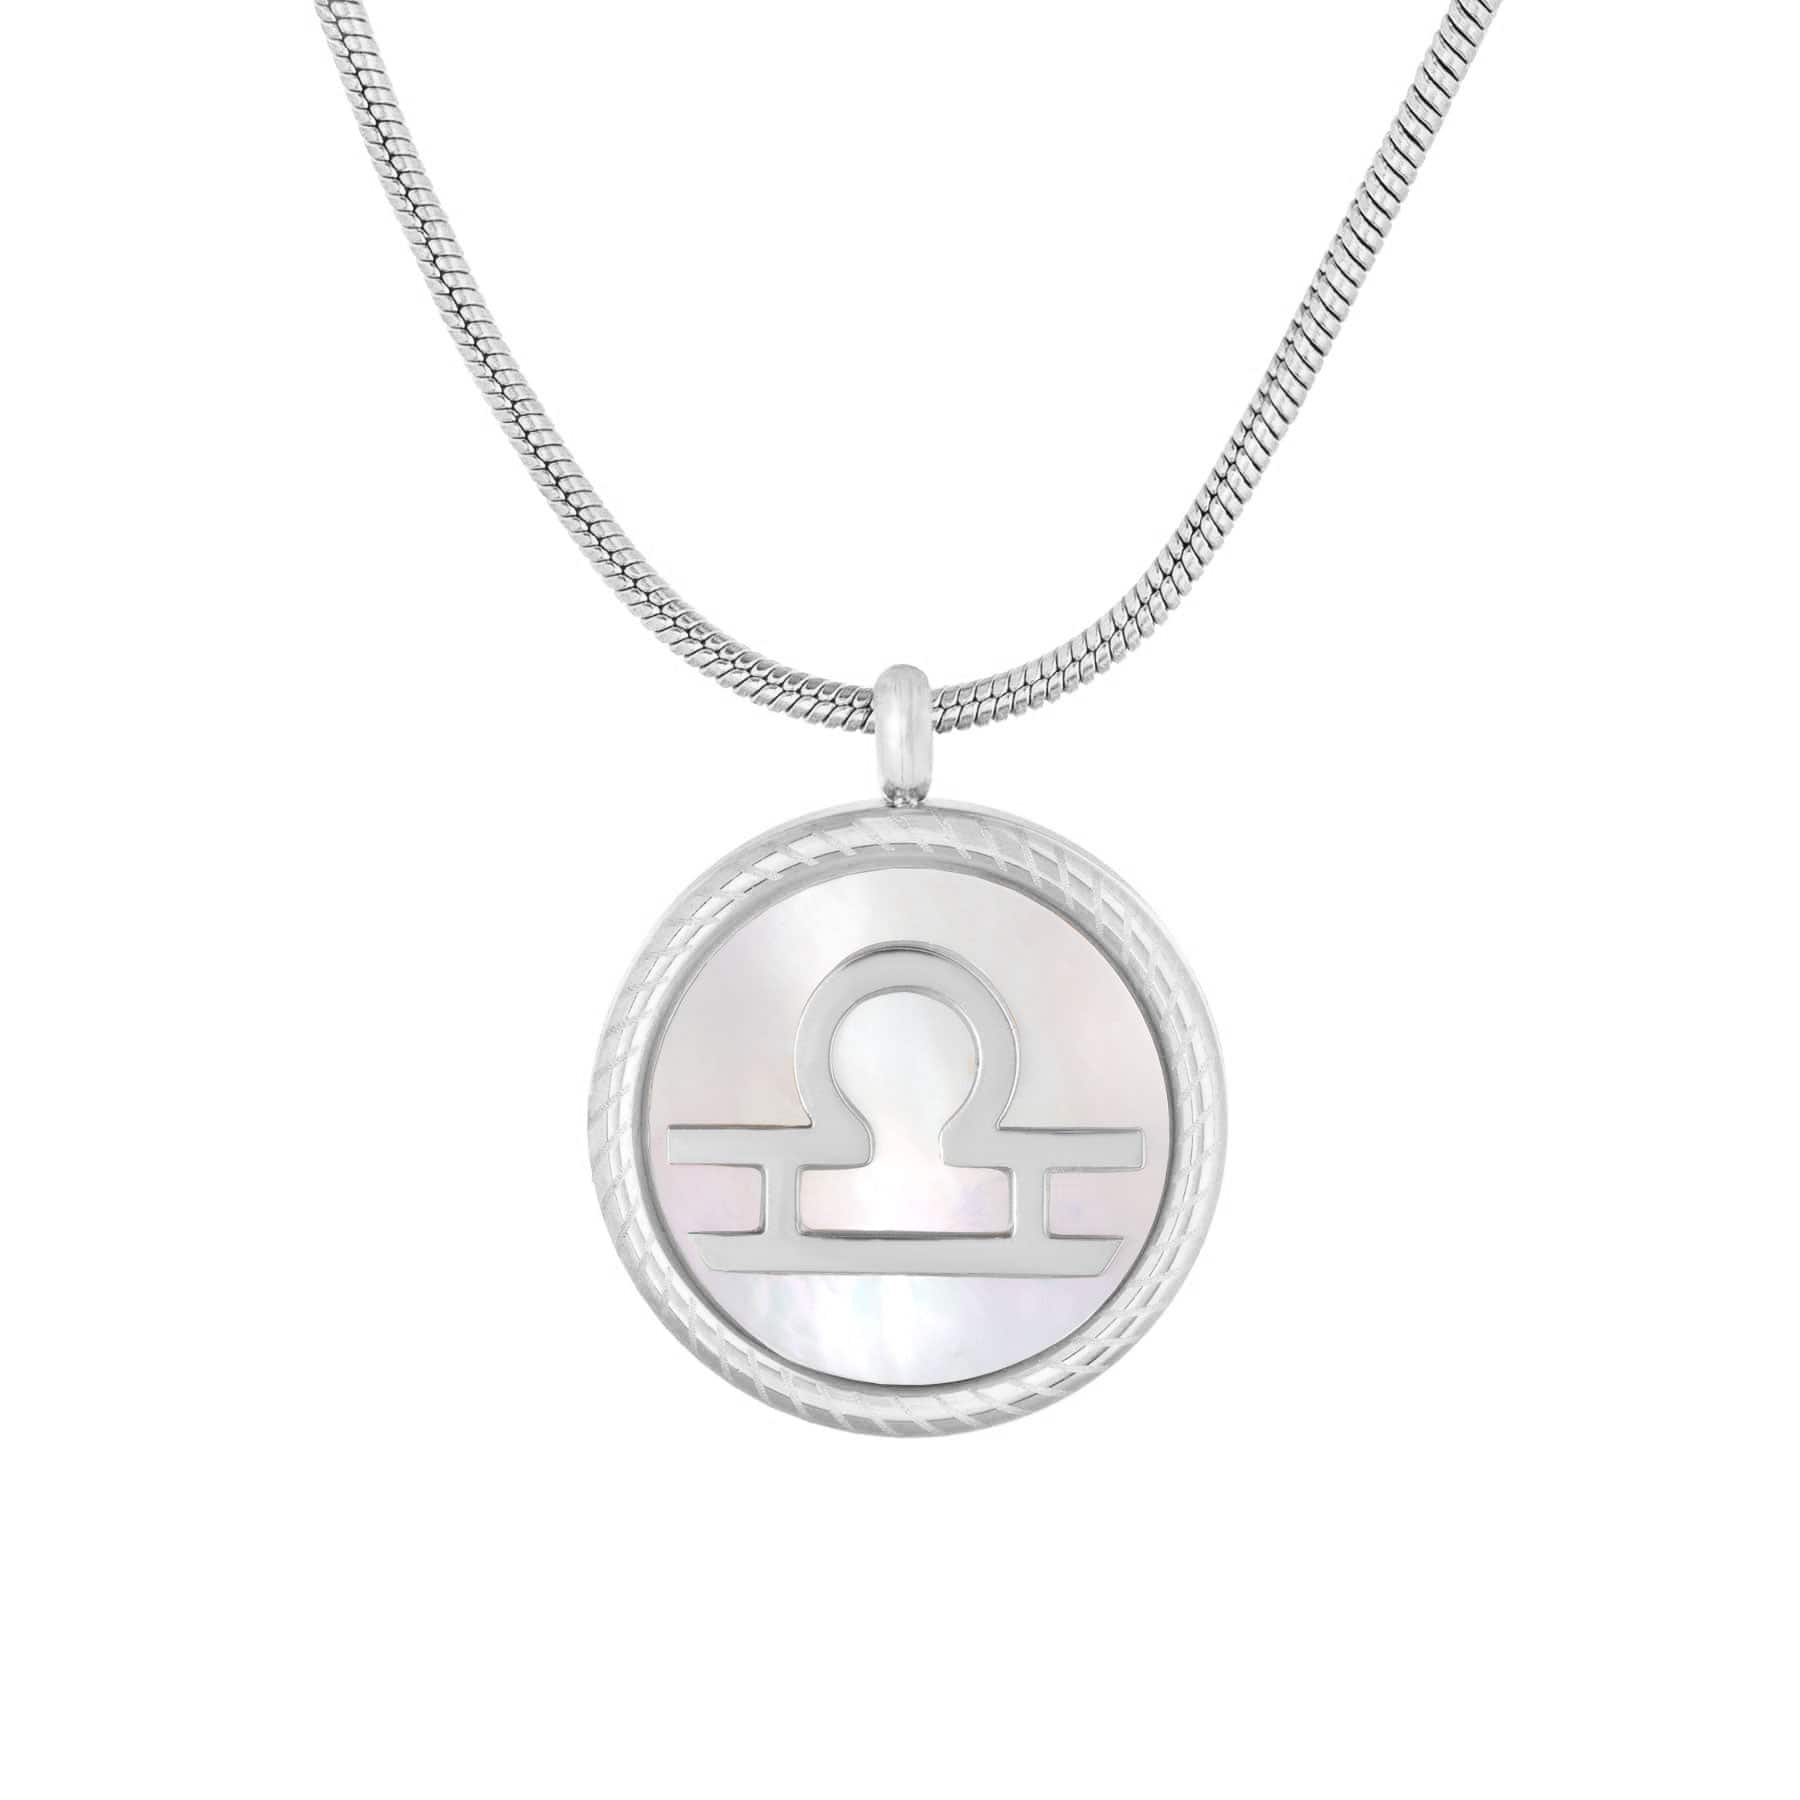 BohoMoon Stainless Steel Frost Zodiac Necklace Silver / Libra